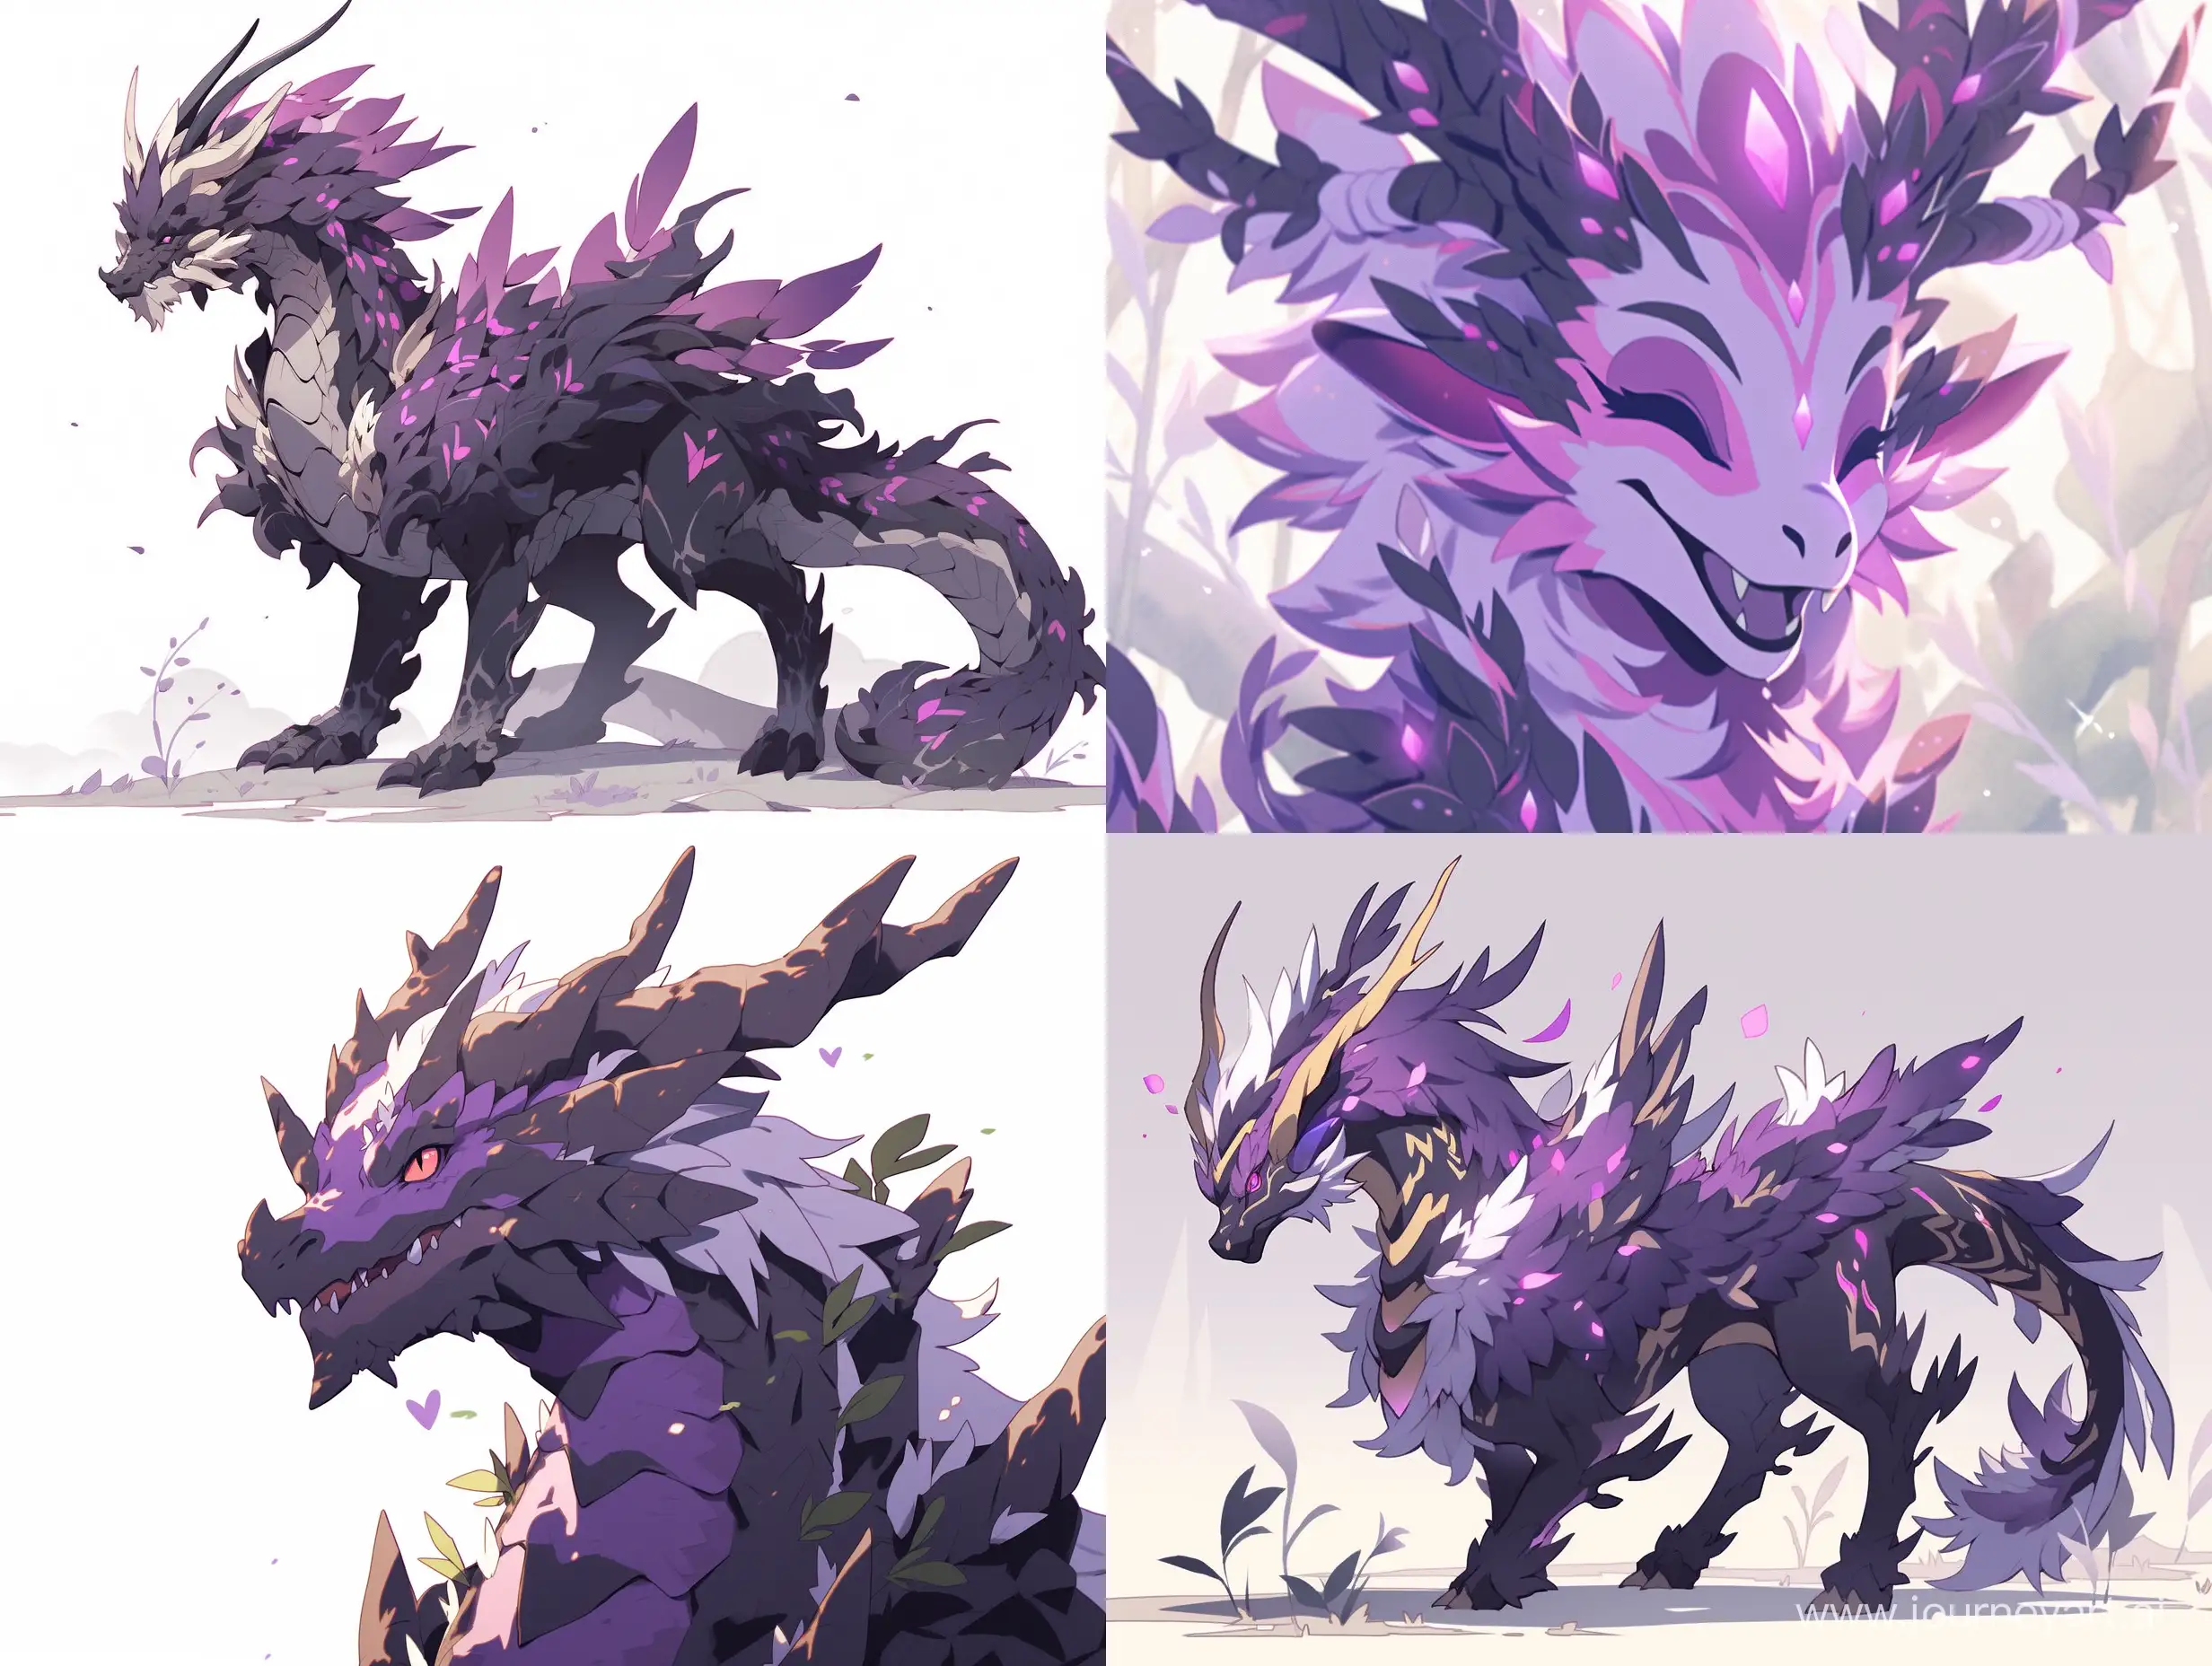 Smiling-Purple-Dragon-with-Contrasting-Colors-and-Glossy-Skin